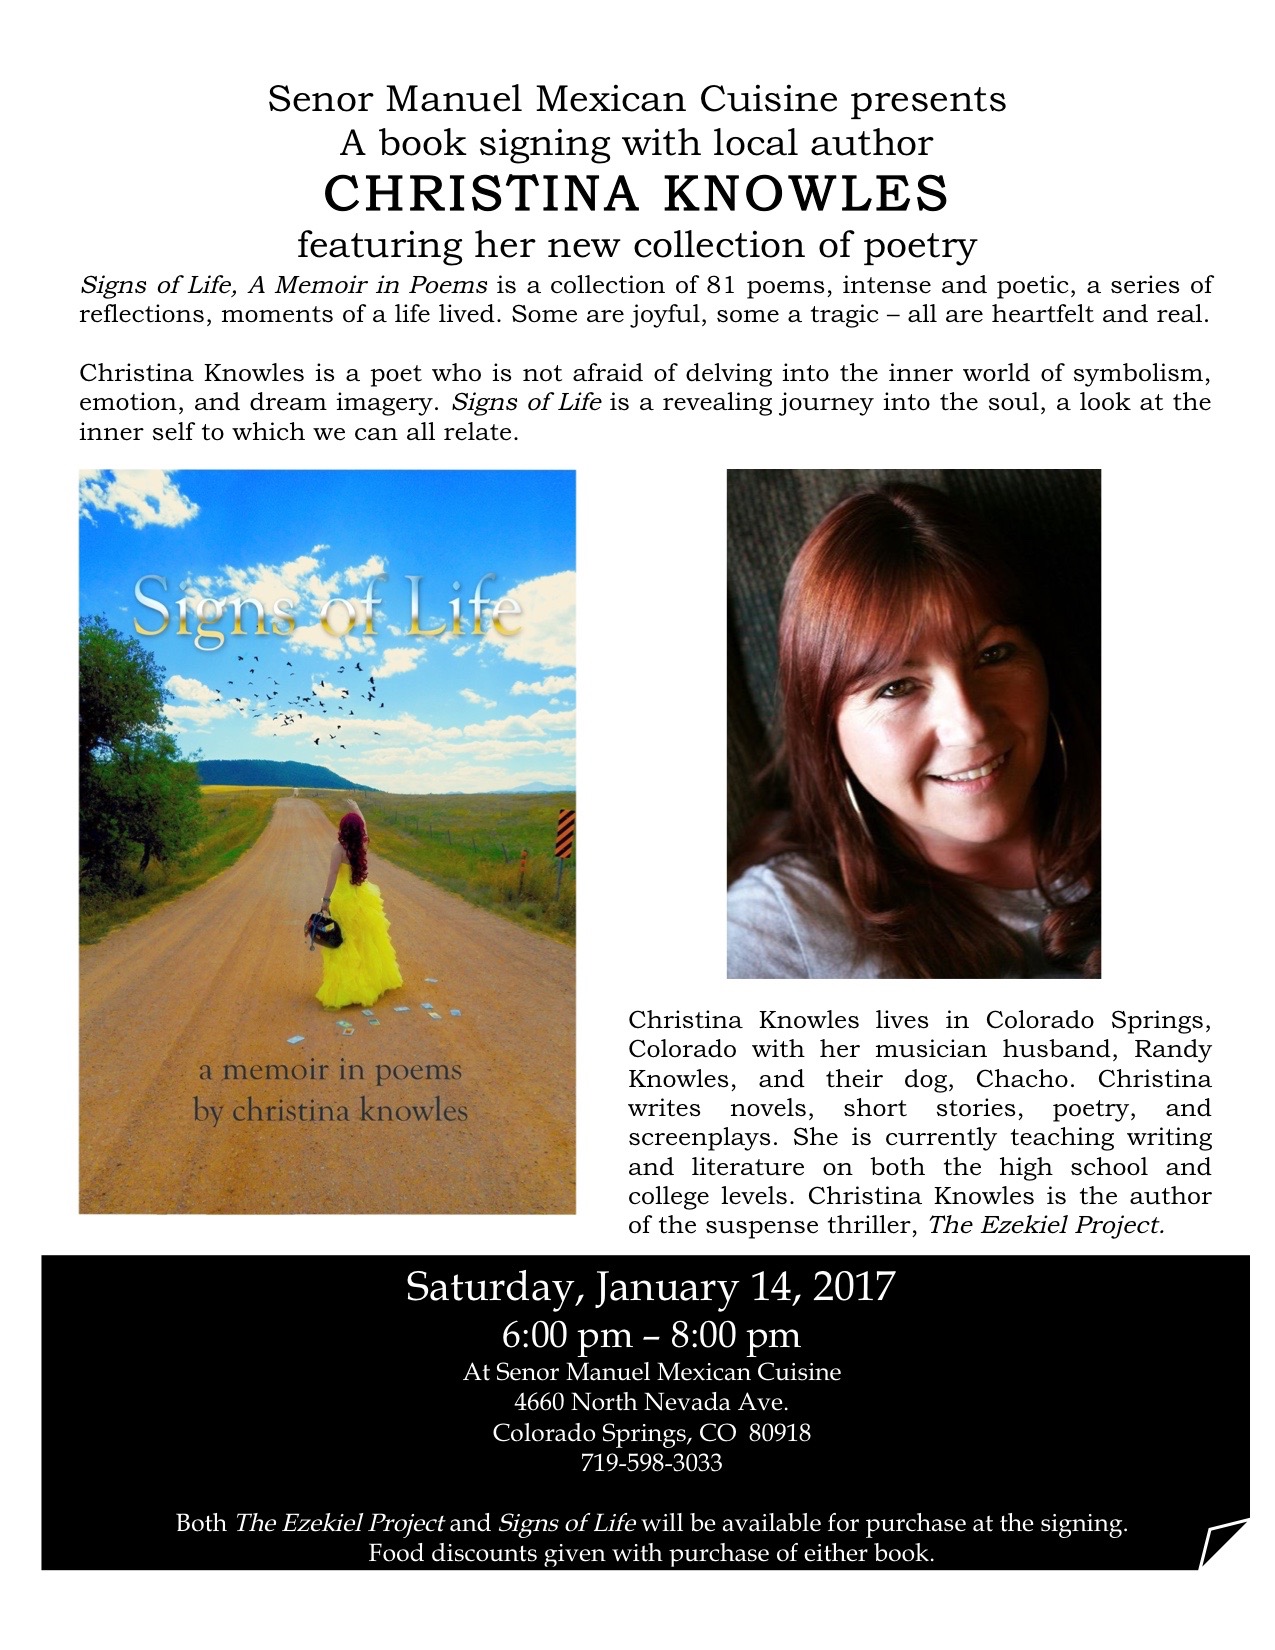 knowles-book-signing-flyer-2